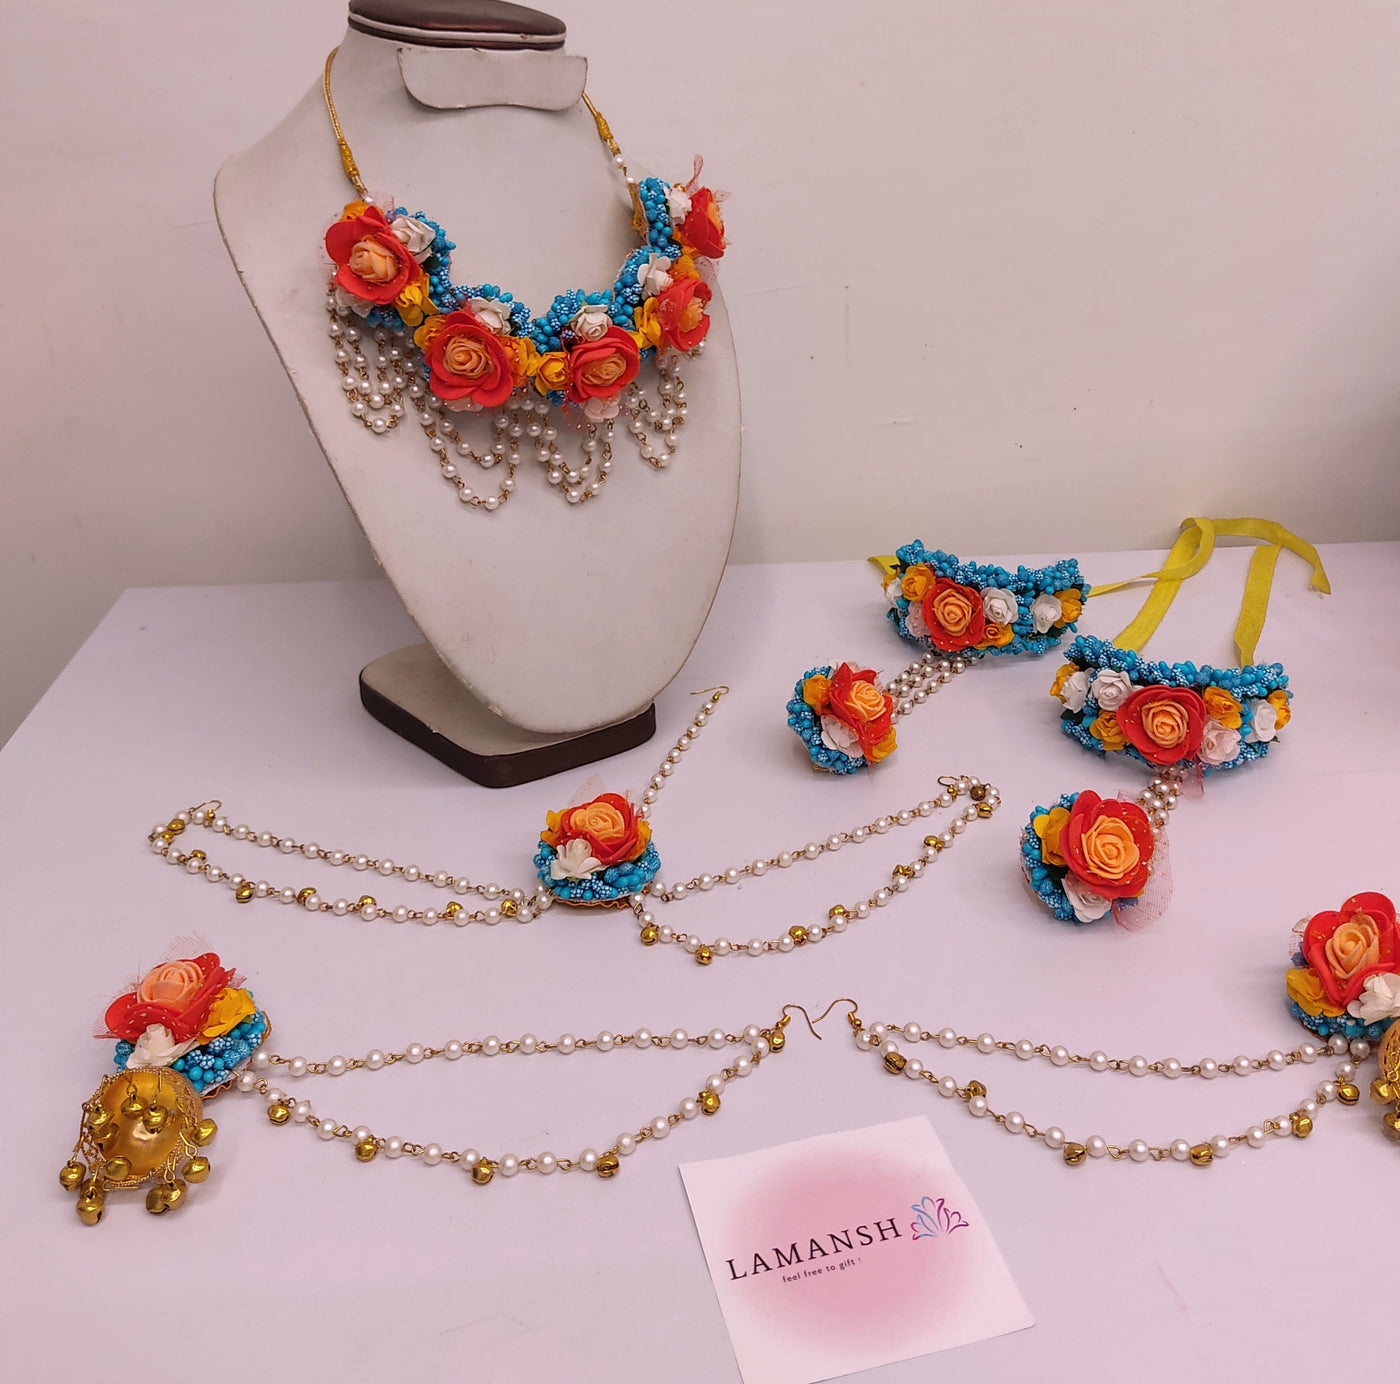 Lamansh Flower 🌺 Jewellery 1 Necklace, 2 Earrings with extended clips ,1 Maangtika with side chain & 2 Bracelets Attached with Ring set / Red Peach White Blue LAMANSH® Handmade Flower Jewellery Set For Women & Girls / Jewelry Set for Haldi , Mehendi & Baby Shower Event